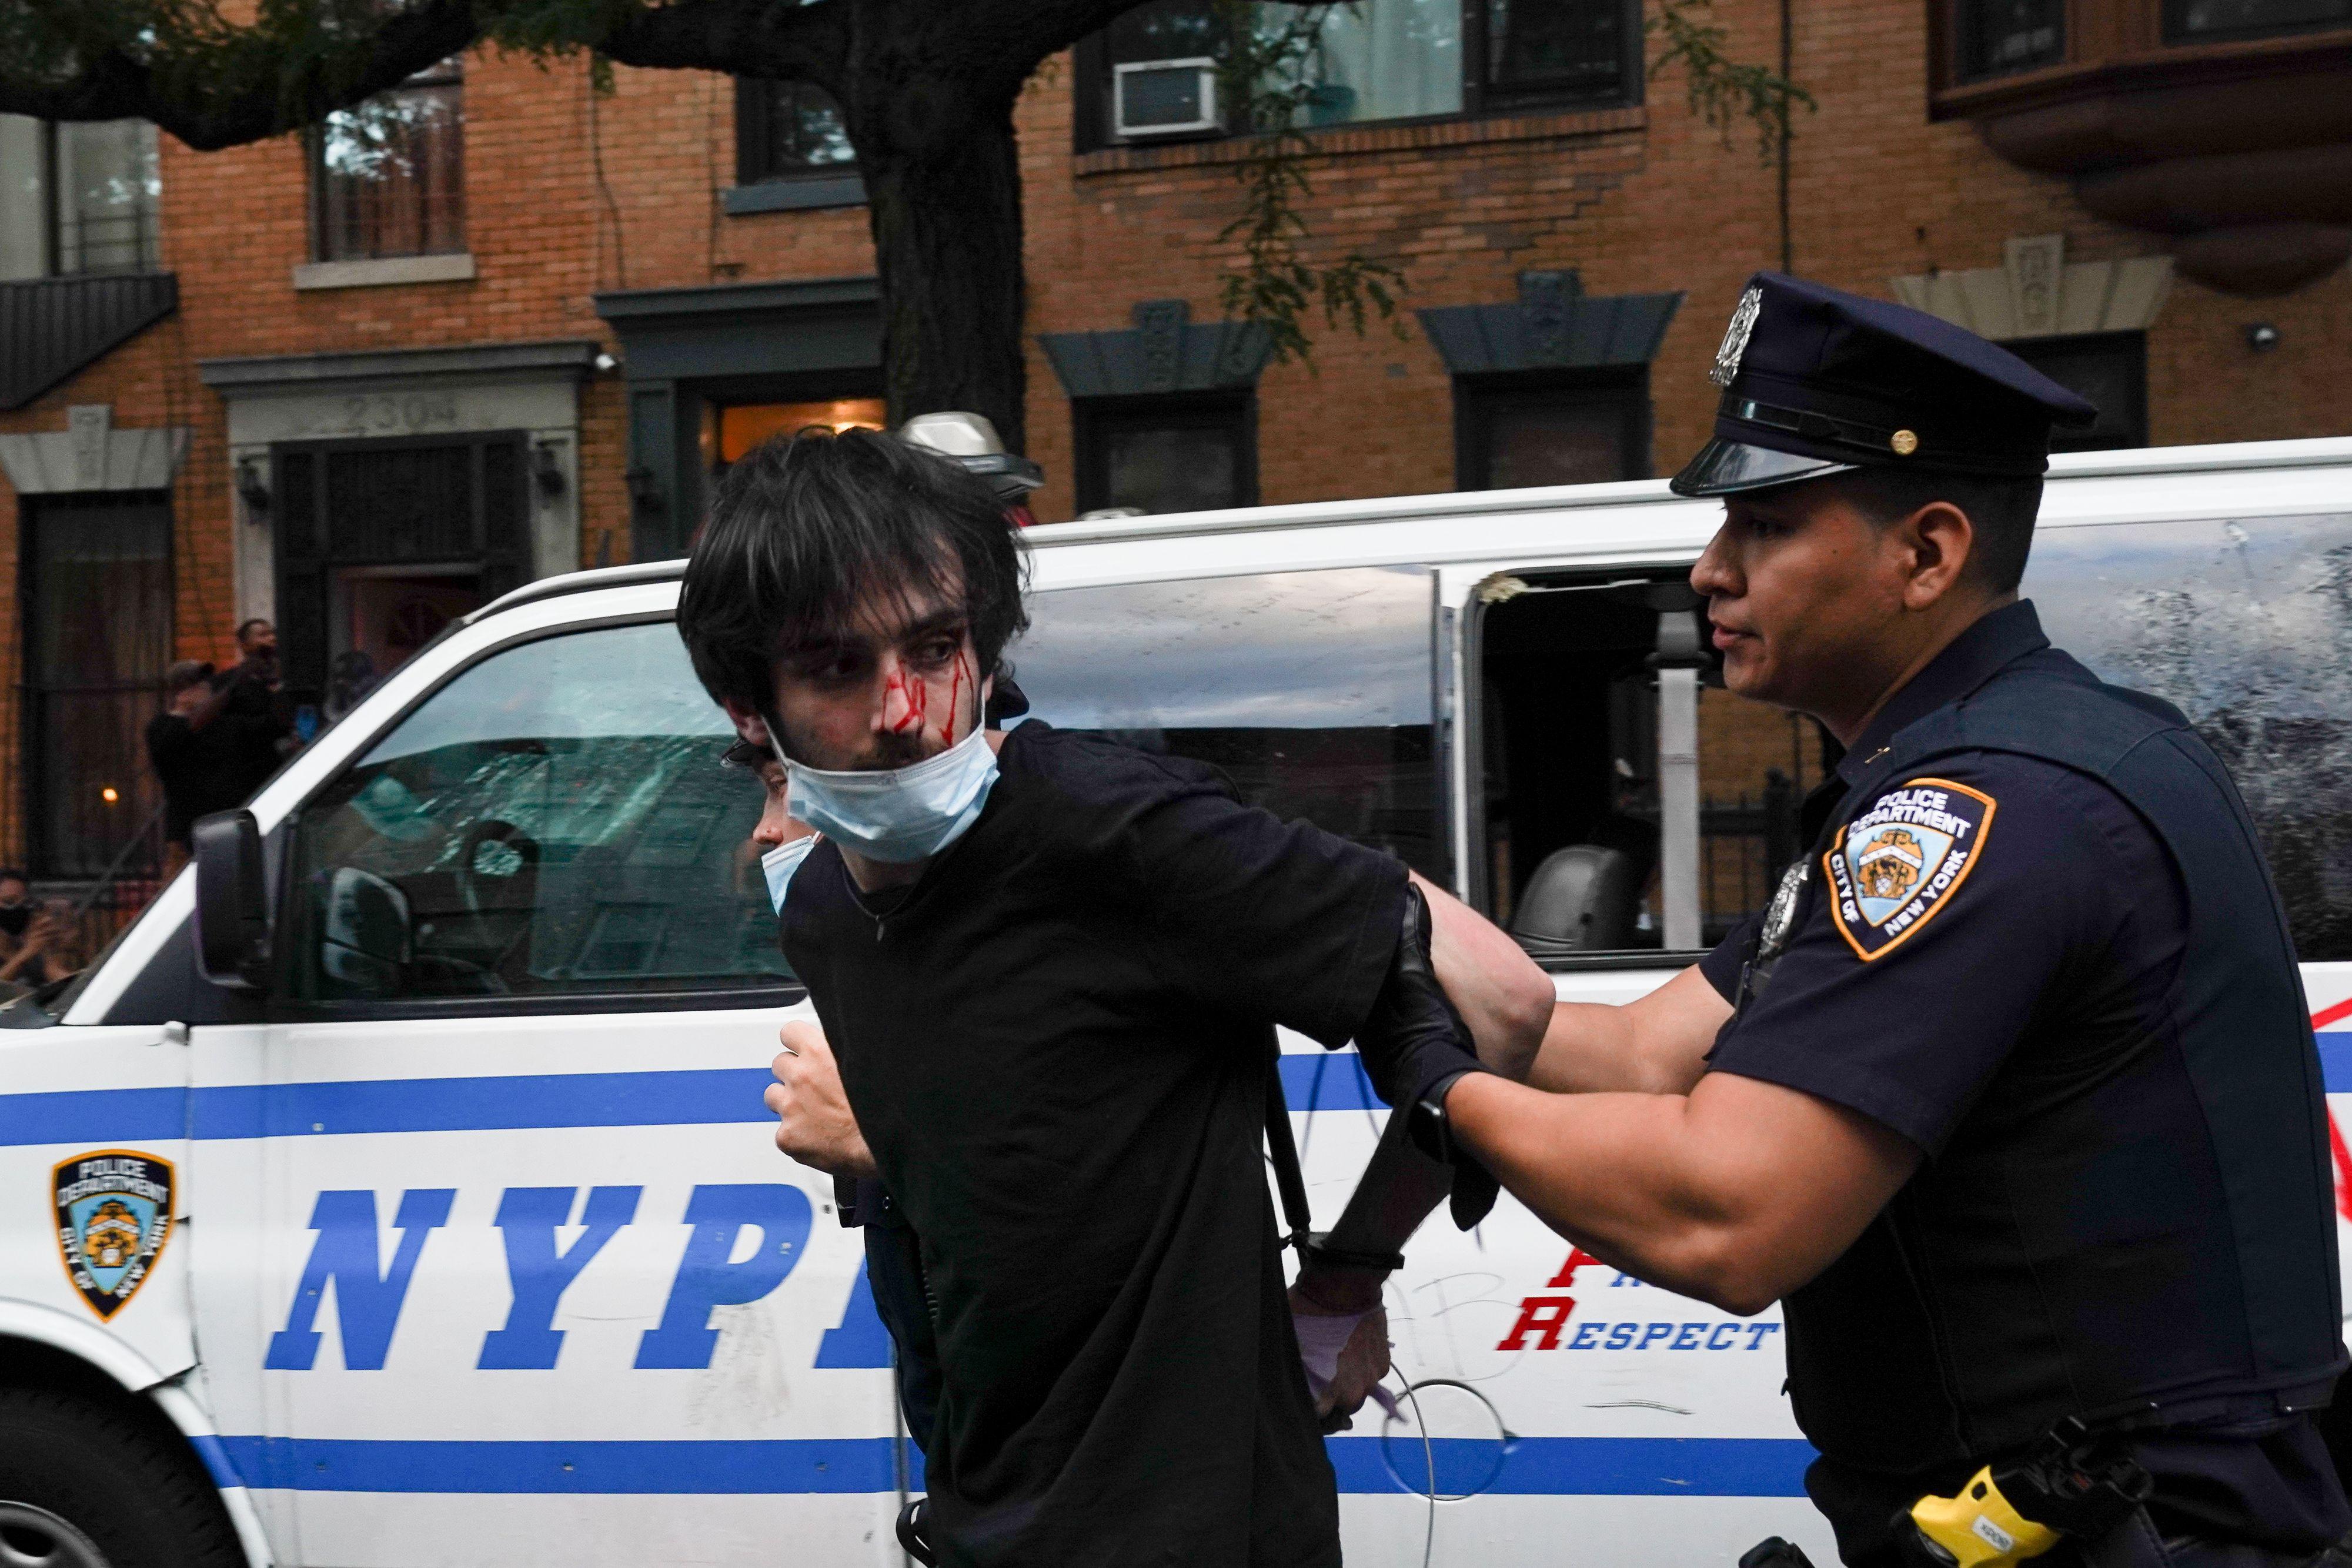 NYPD officers arrest protesters during a demonstration against the killing of George Floyd by Minneapolis police on May 30, 2020 in the Borough of Brooklyn in New York.